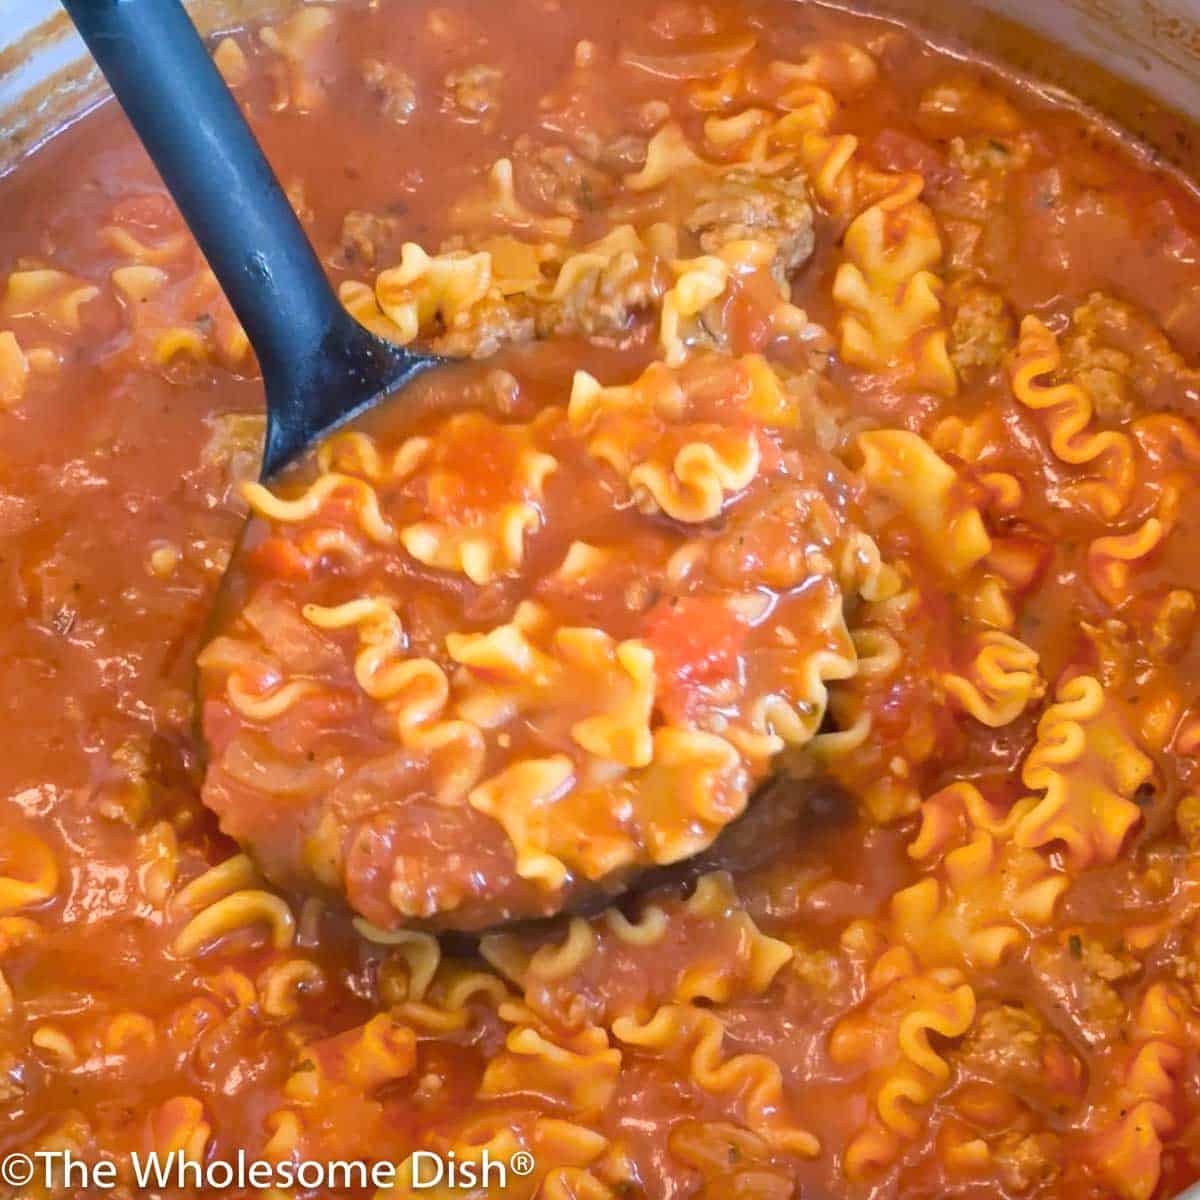 Ladle full of lasagna soup being pulled up out of the pot.